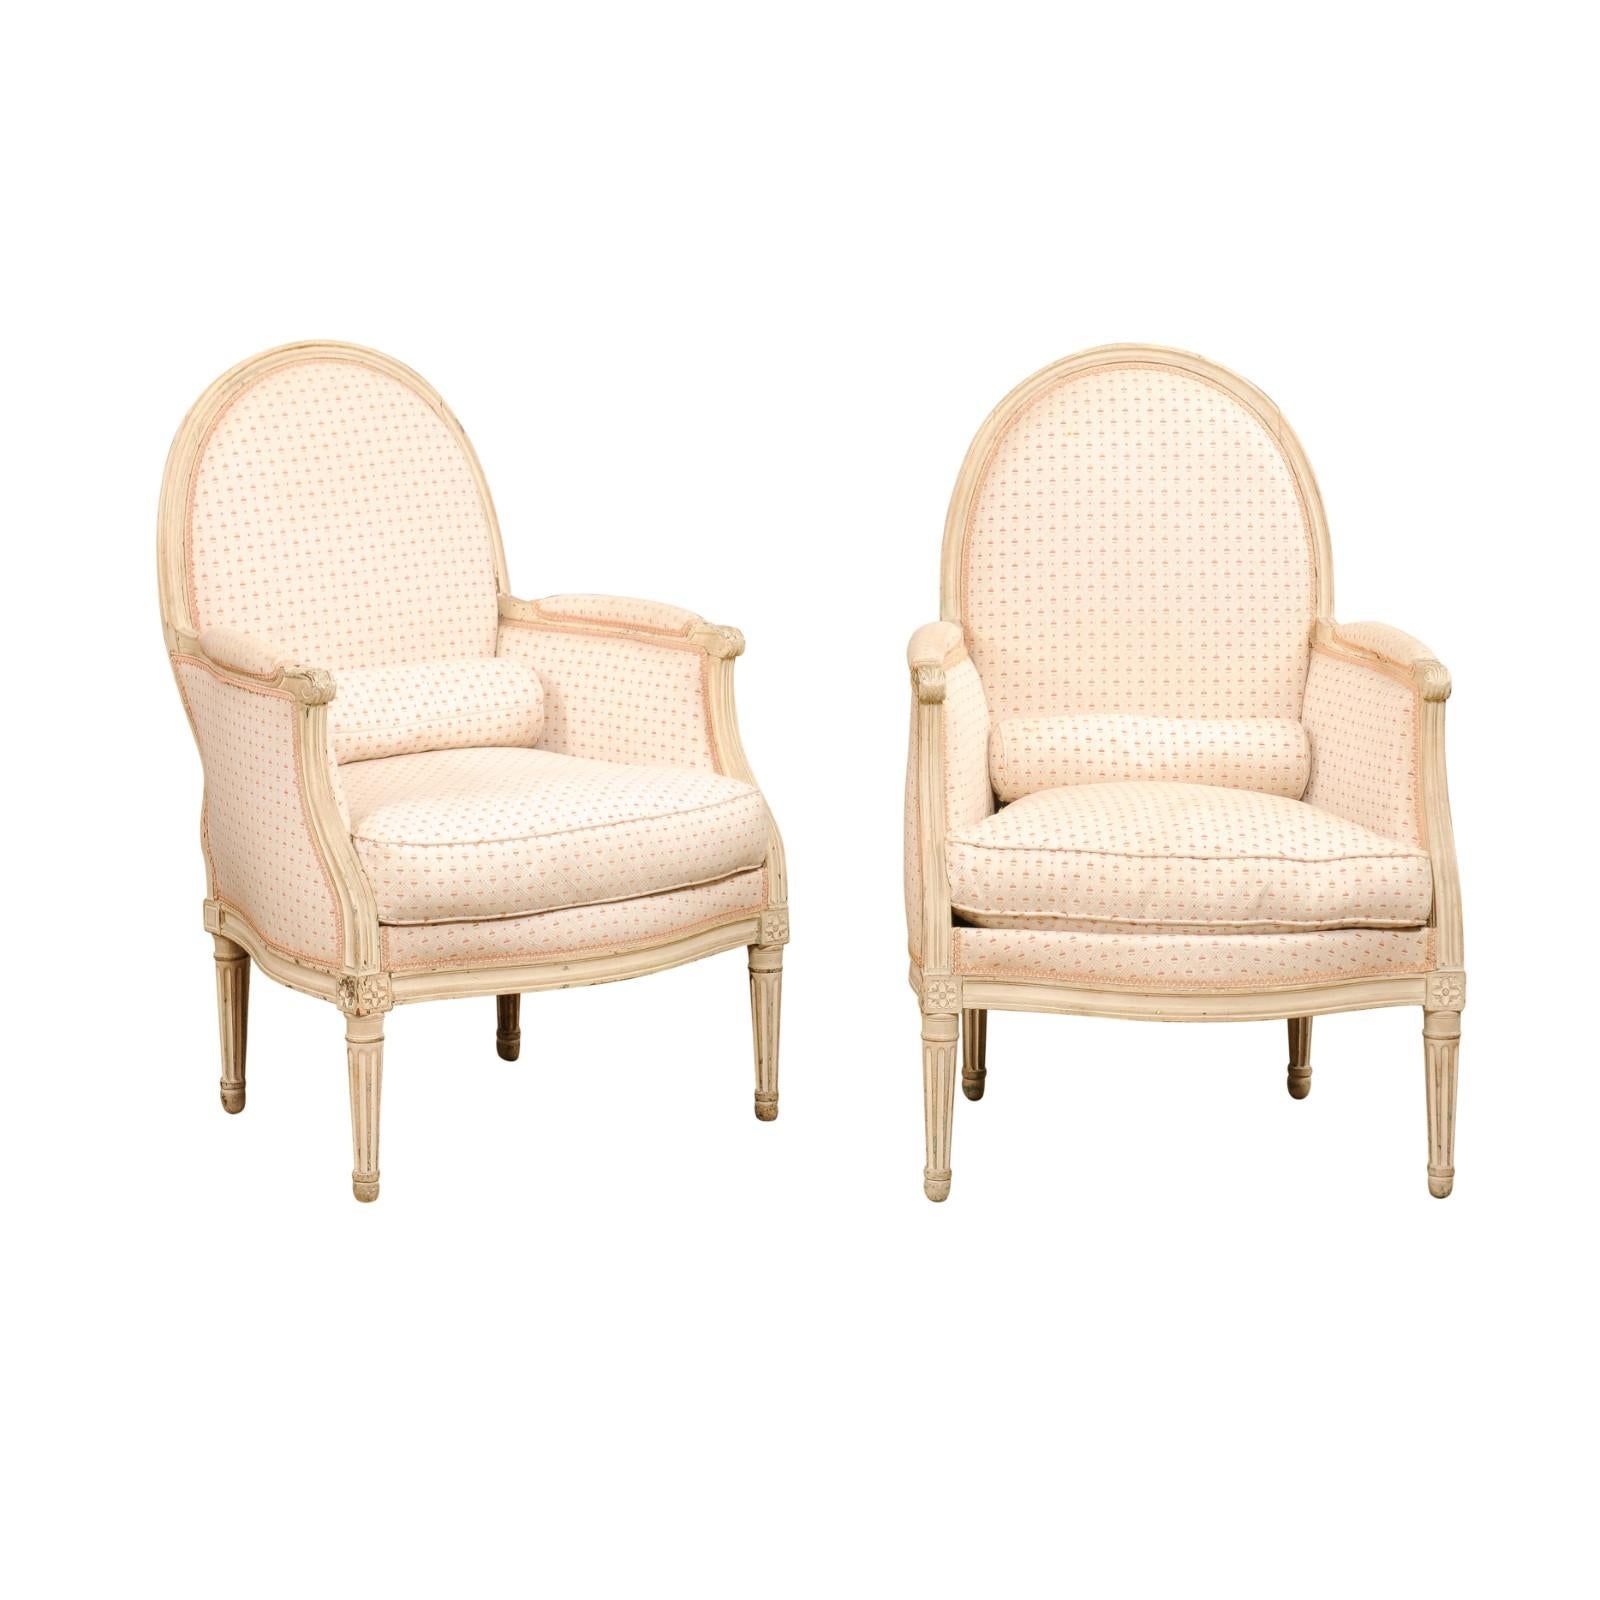 Pair of French Louis XVI Style Painted Bergères Chairs with Oval Shaped Backs For Sale 6